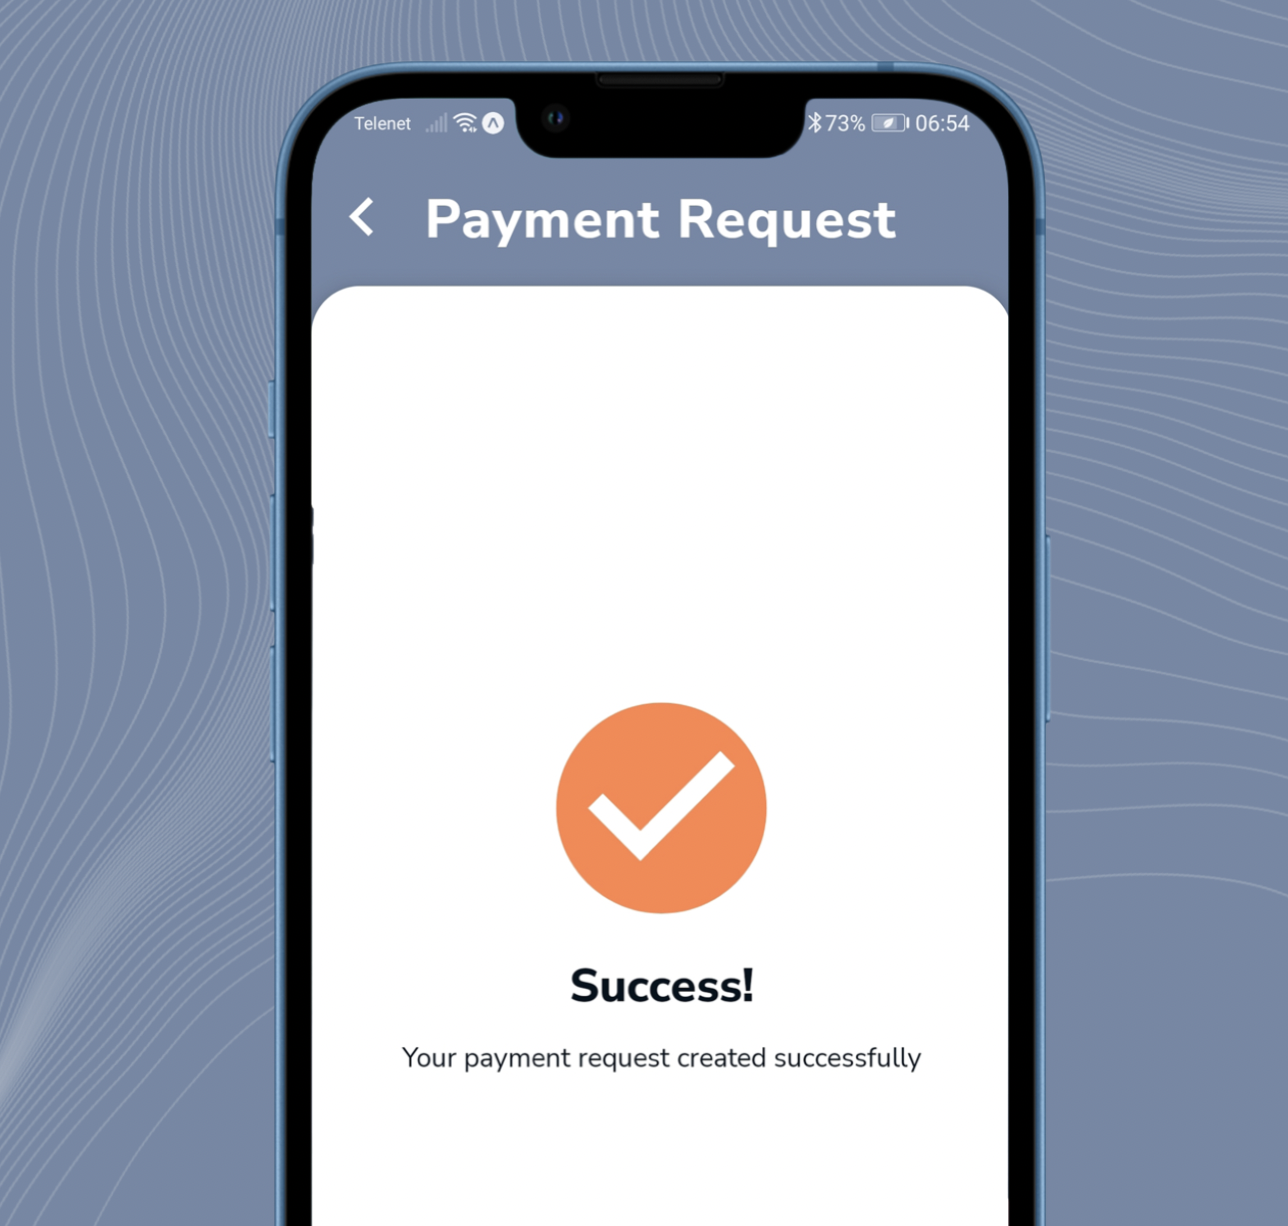 TSB launches new BankiFi app to help business customers receive quicker, more convenient payments